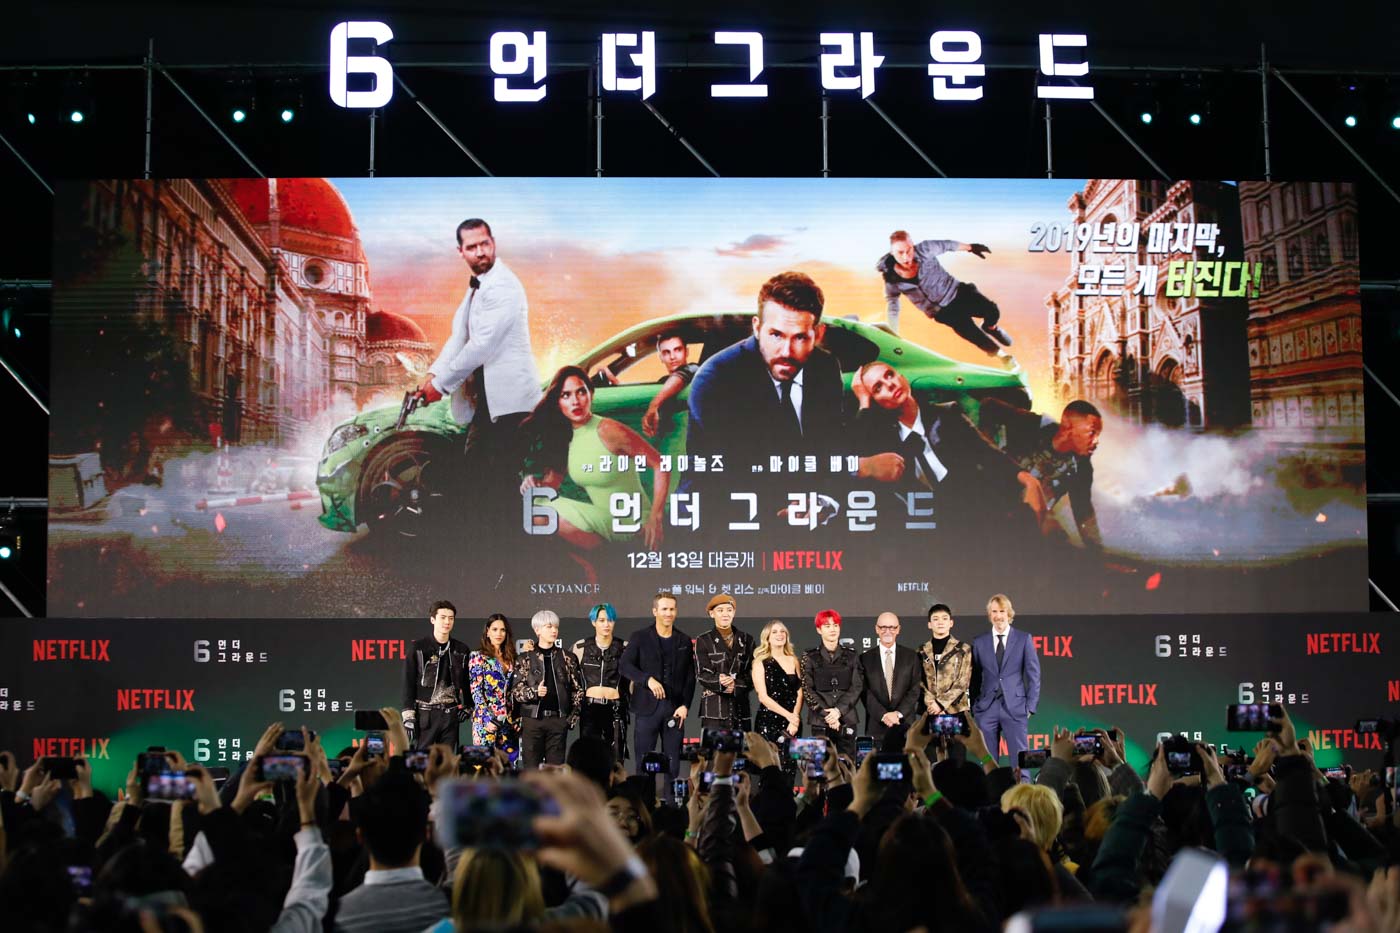 A star-filled night: 6 Underground director Michael Bay and cast led by Ryan Reynolds are joined by K-pop group EXO at the world premiere of the Netflix movie at the Dongdaemun Design Plaza on December 02, 2019 in Seoul, South Korea. Photo courtesy of Netflix 